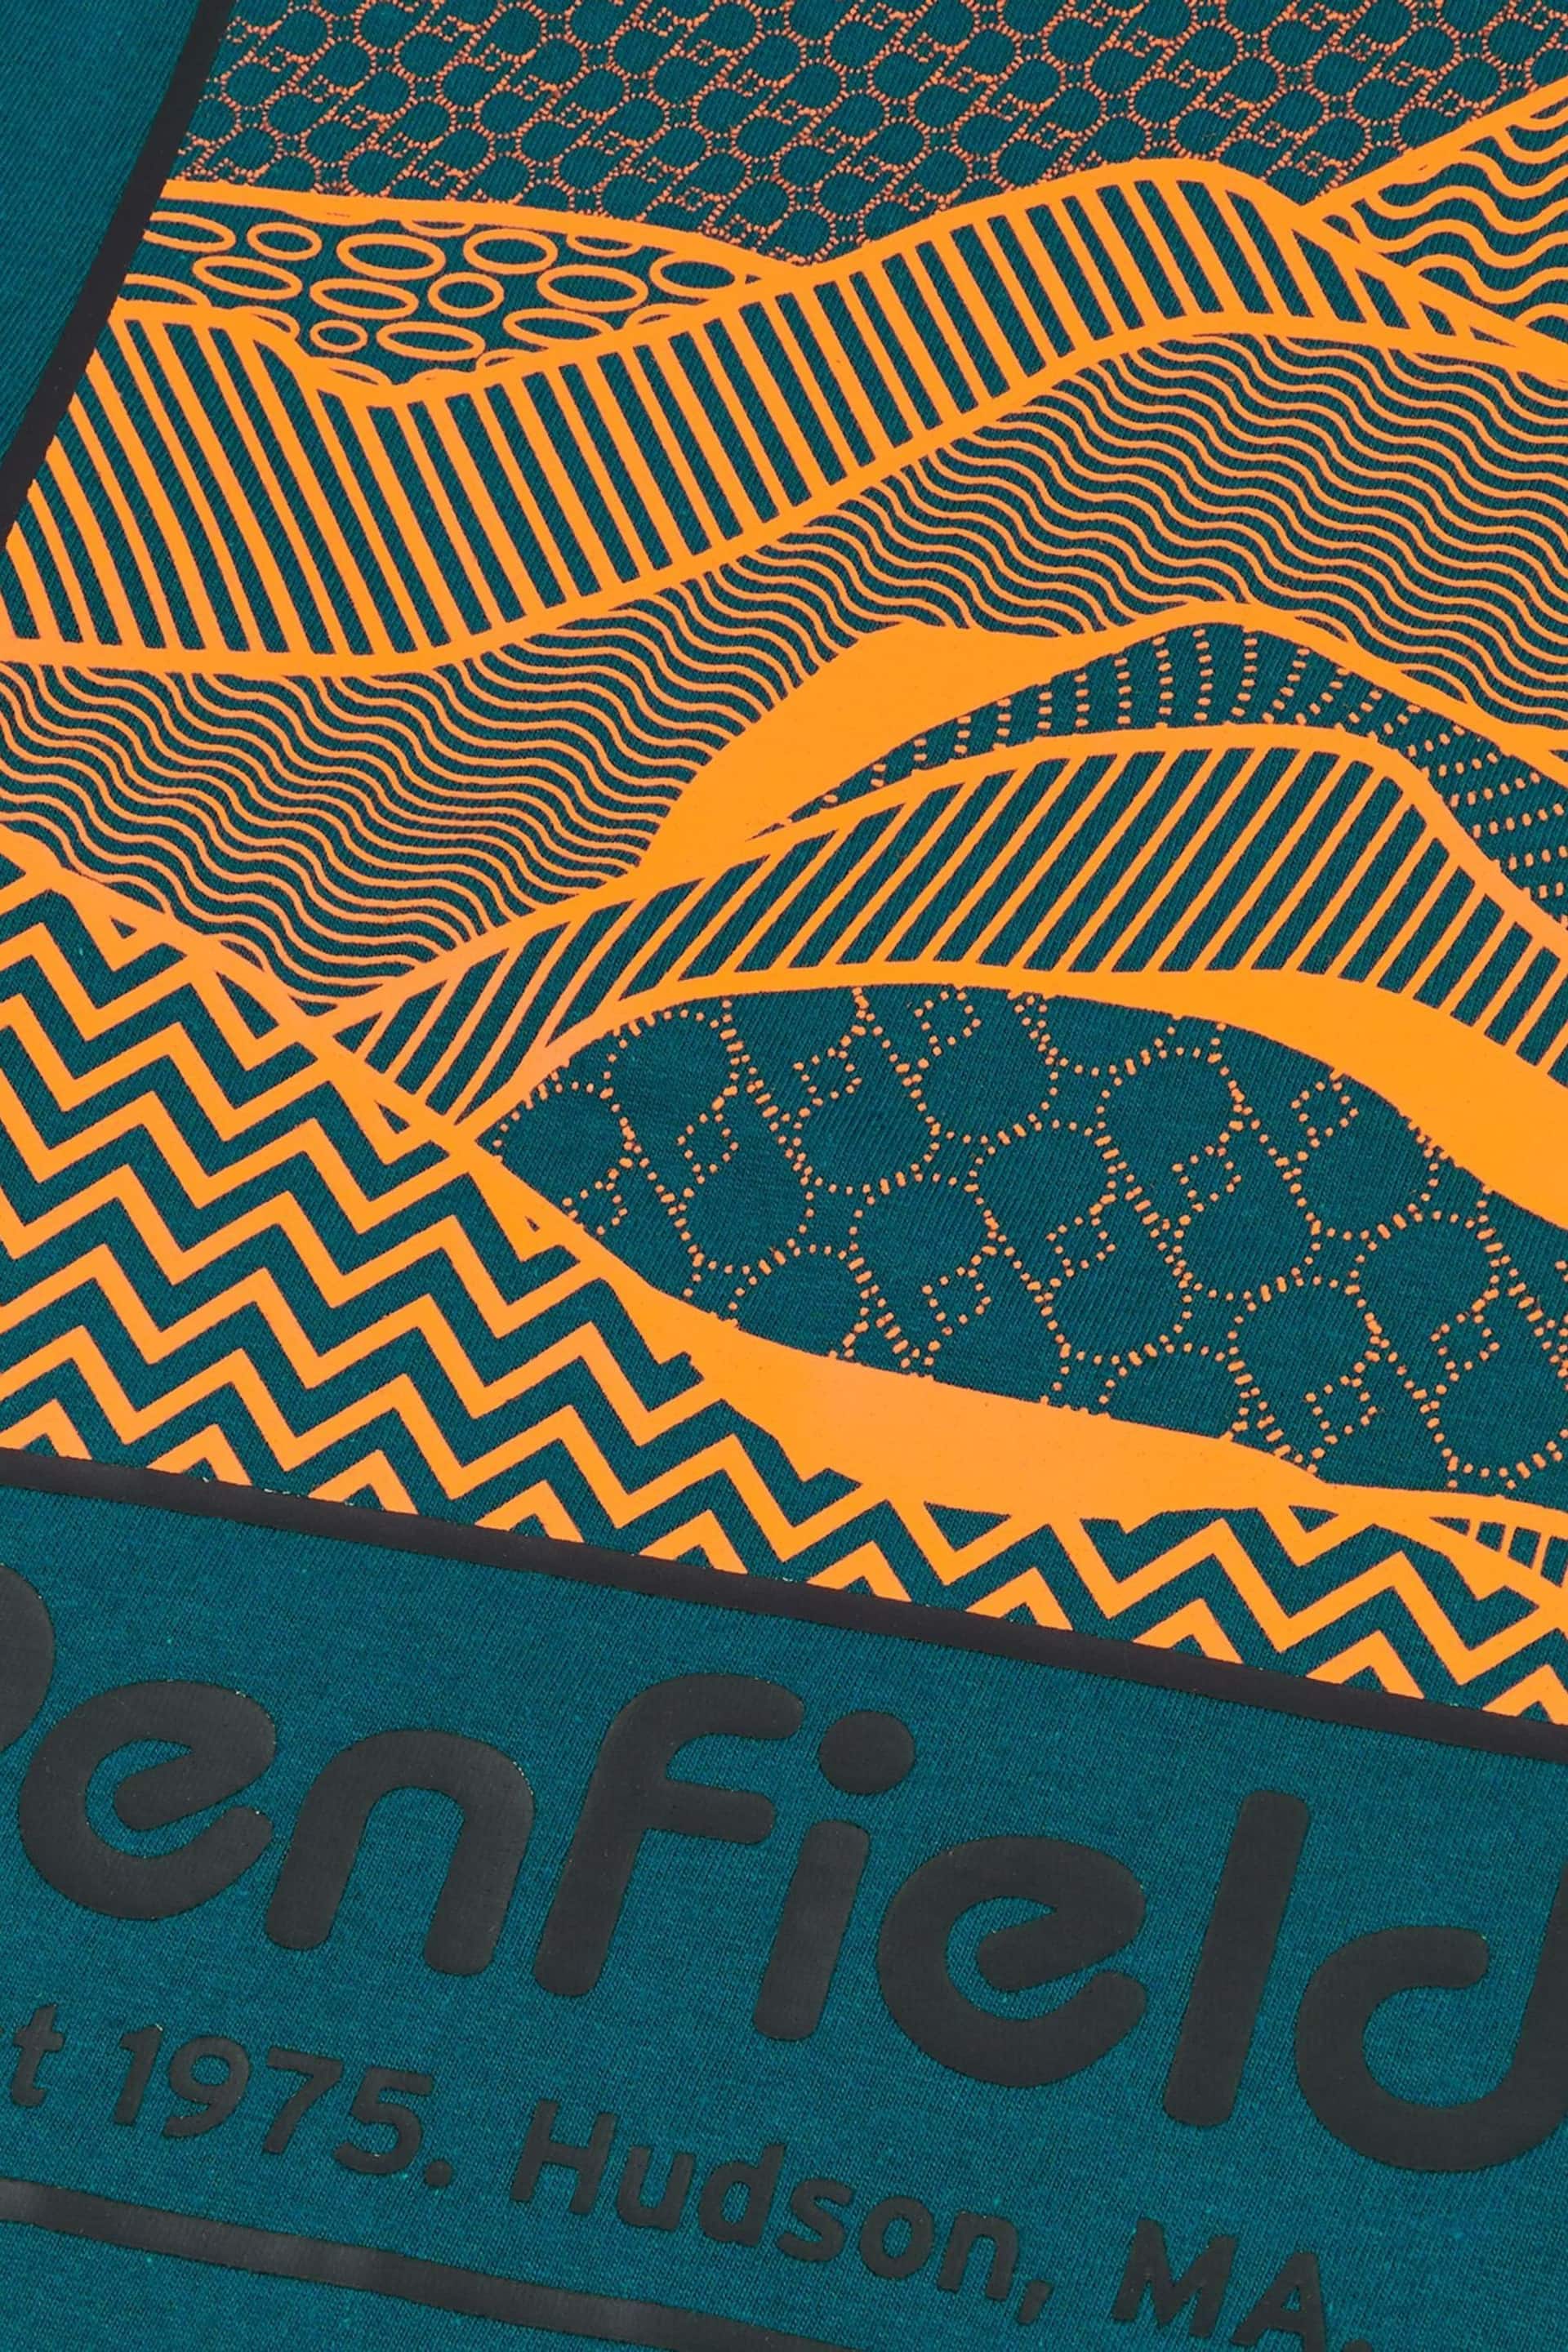 Penfield Blue Sketch Mountain Back Graphic Long-Sleeved T-Shirt - Image 7 of 7